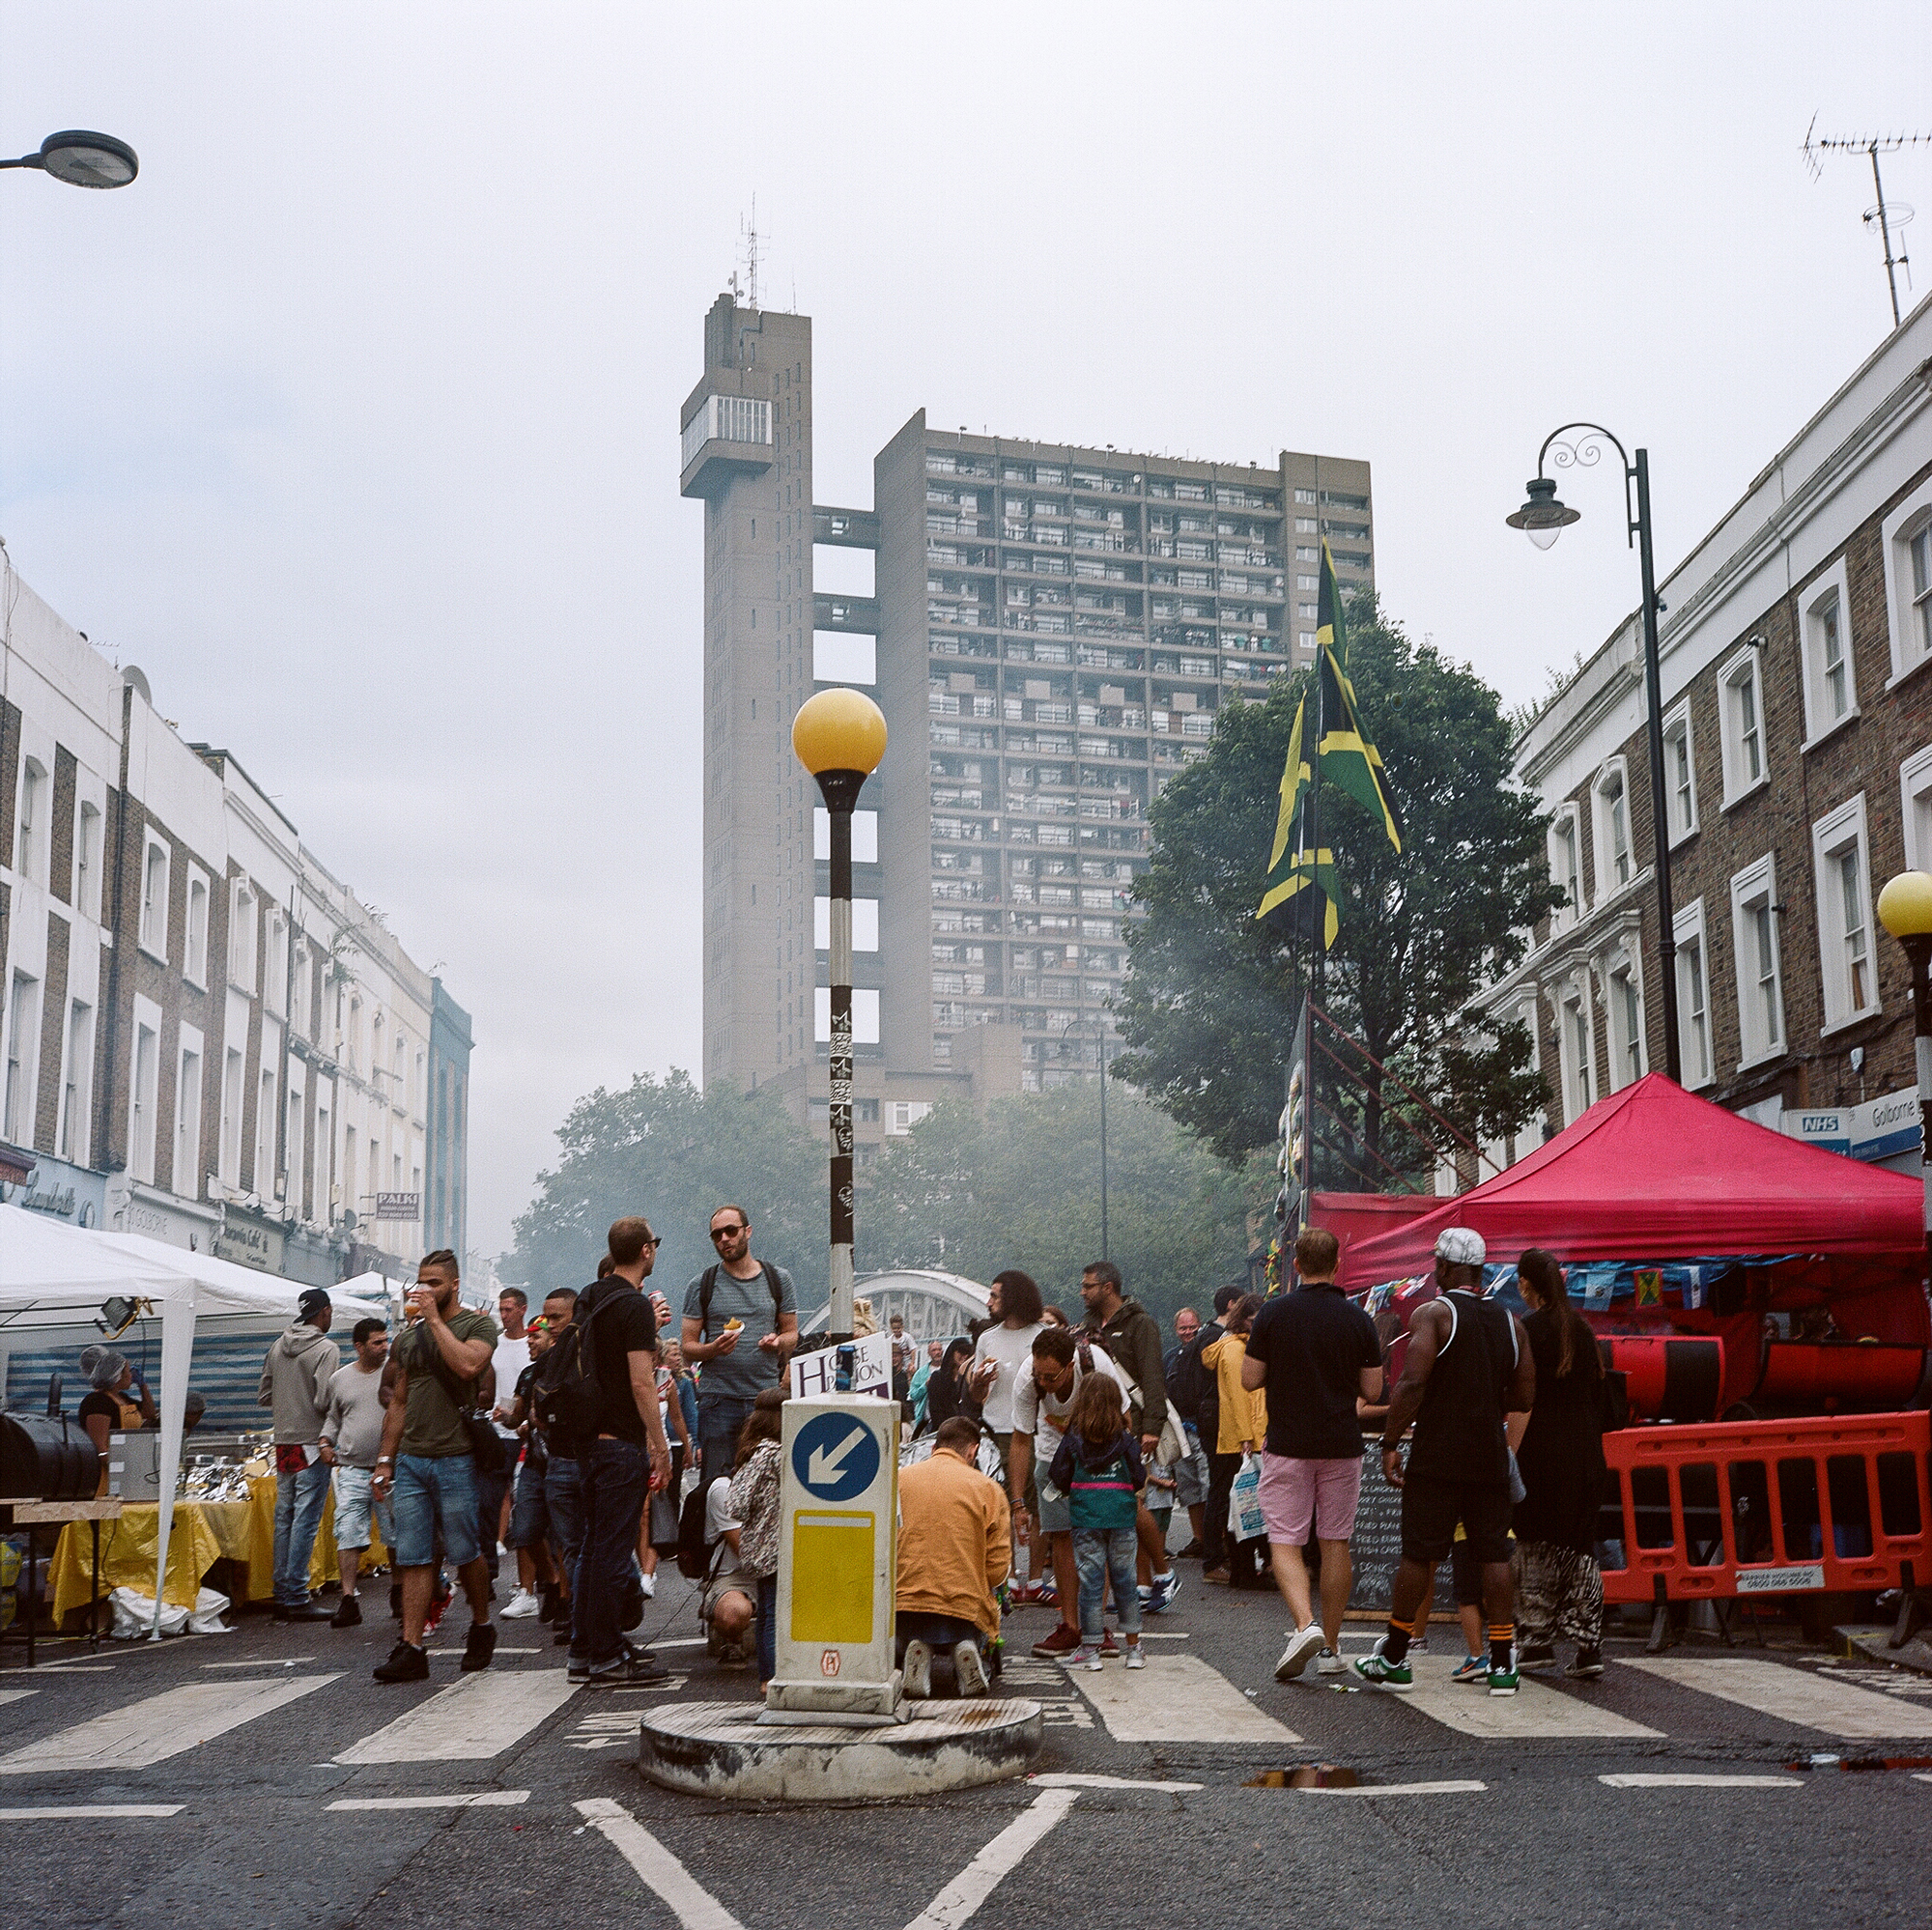 Towering tales of unity : Tackling London's issue of gentrification